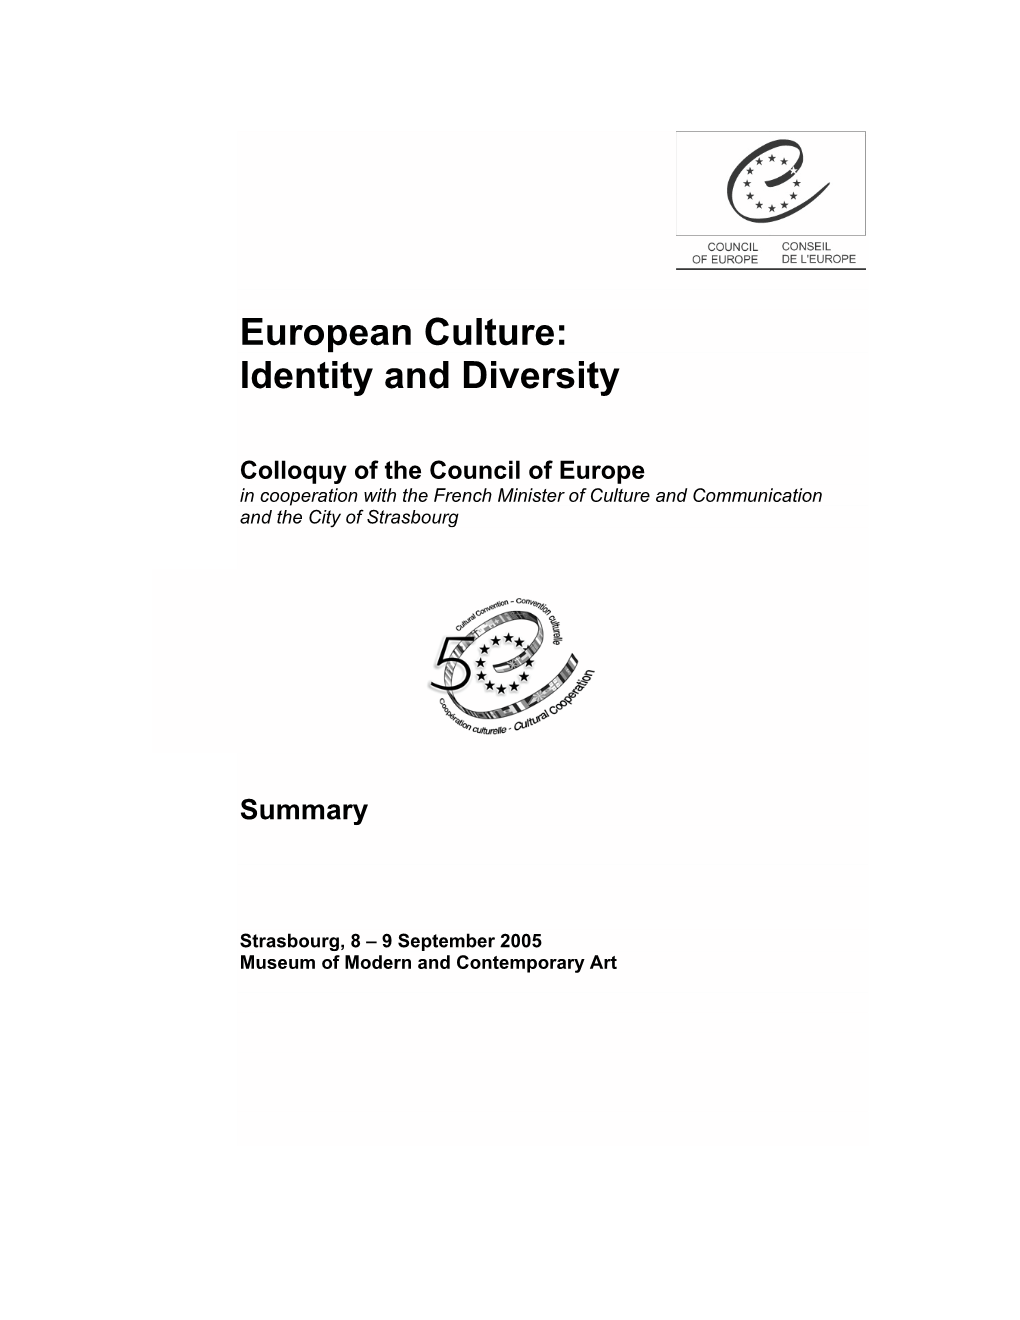 European Culture: Identity and Diversity